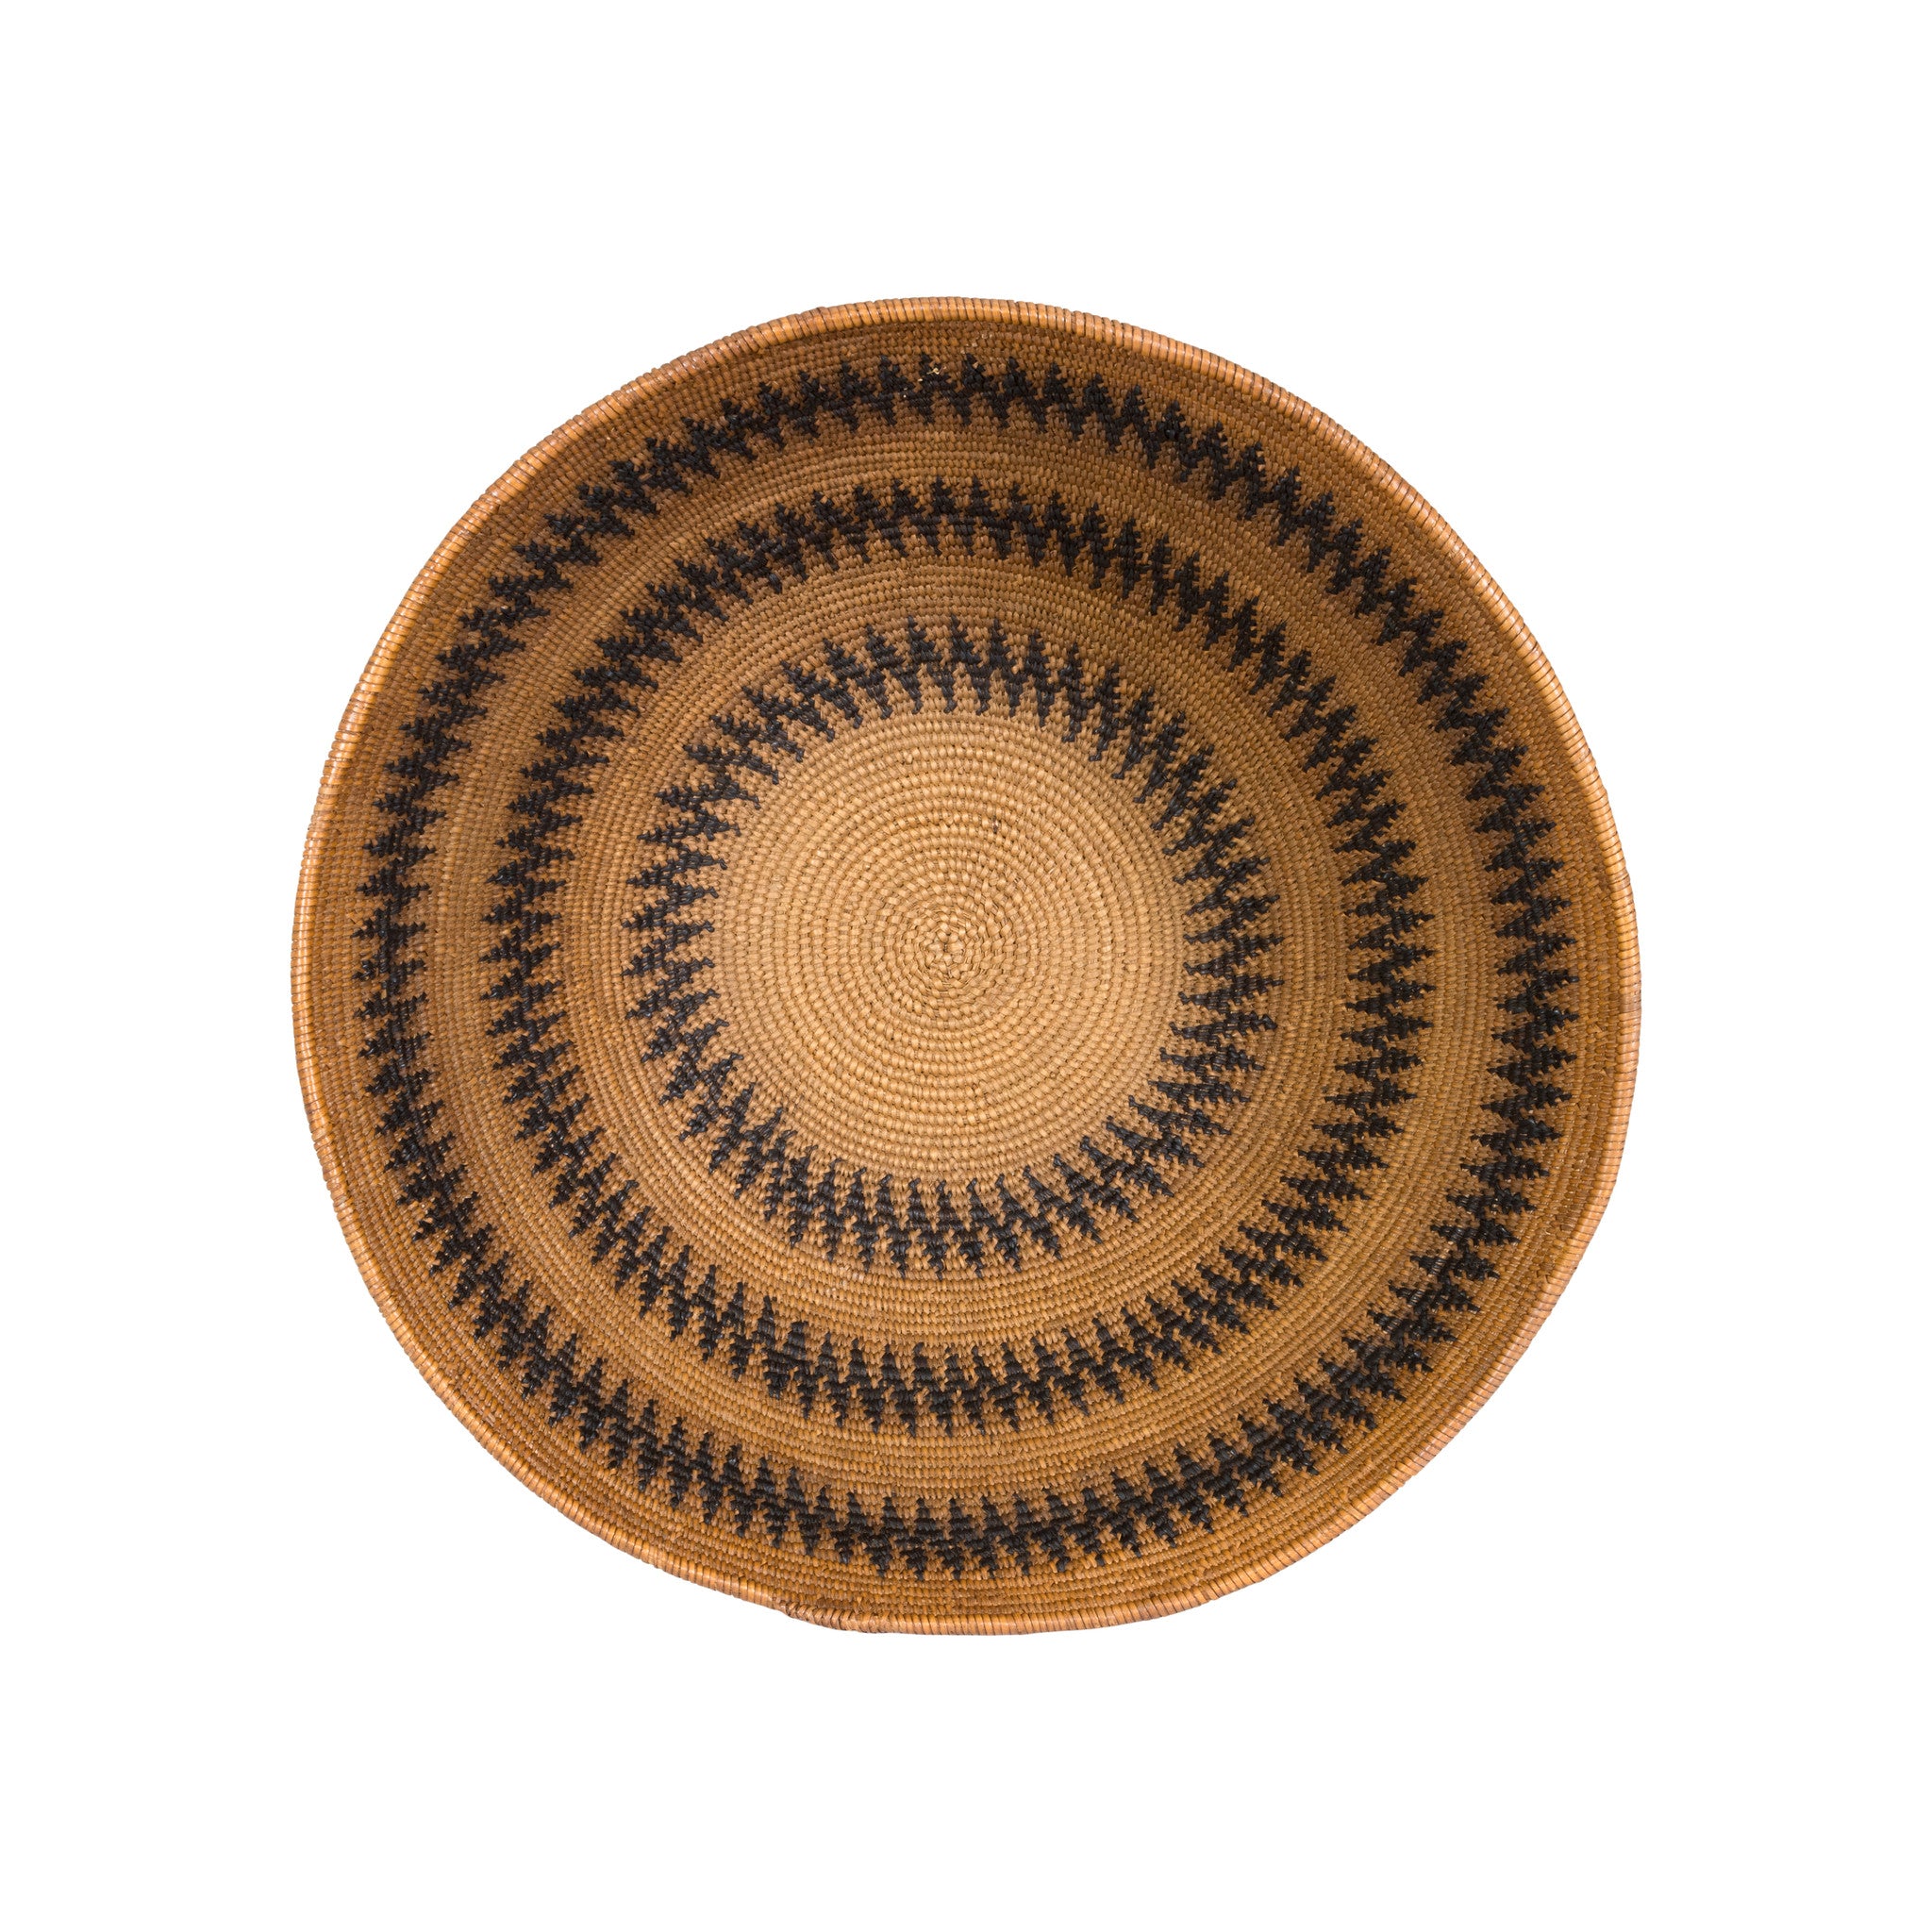 Mission Basketry Bowl